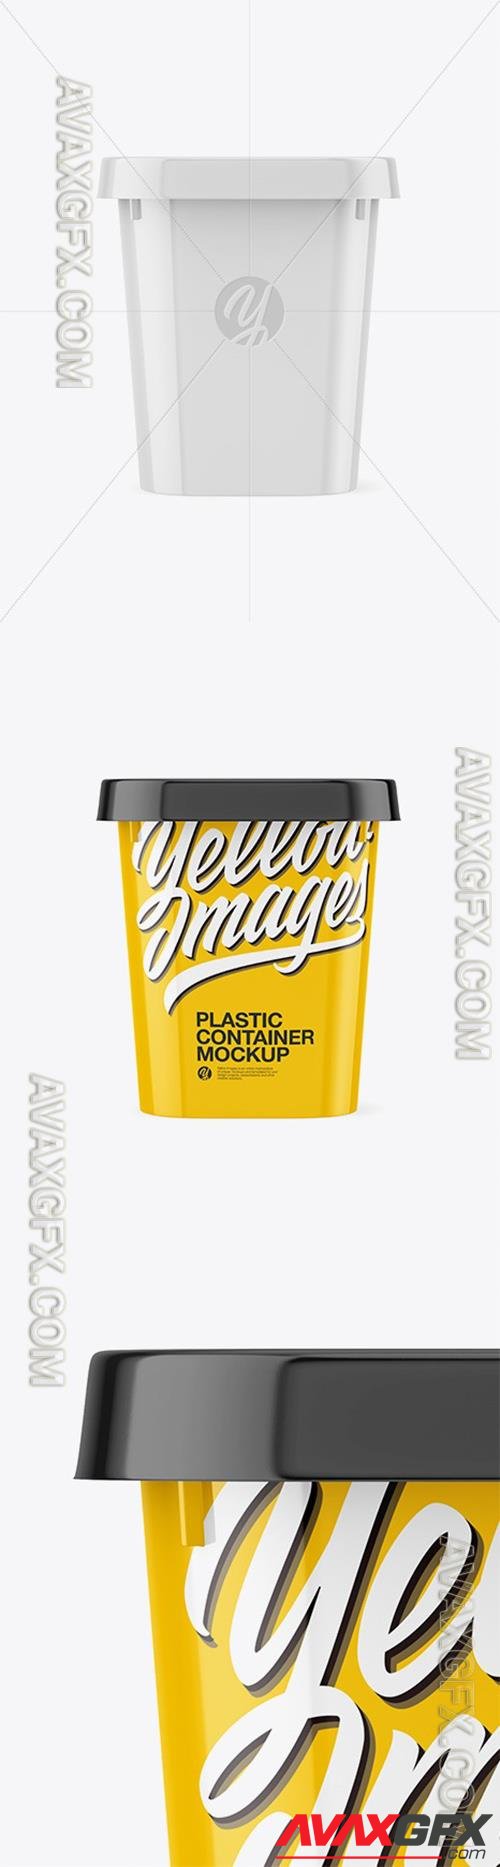 Glossy Plastic Container Mockup 45817 TIF